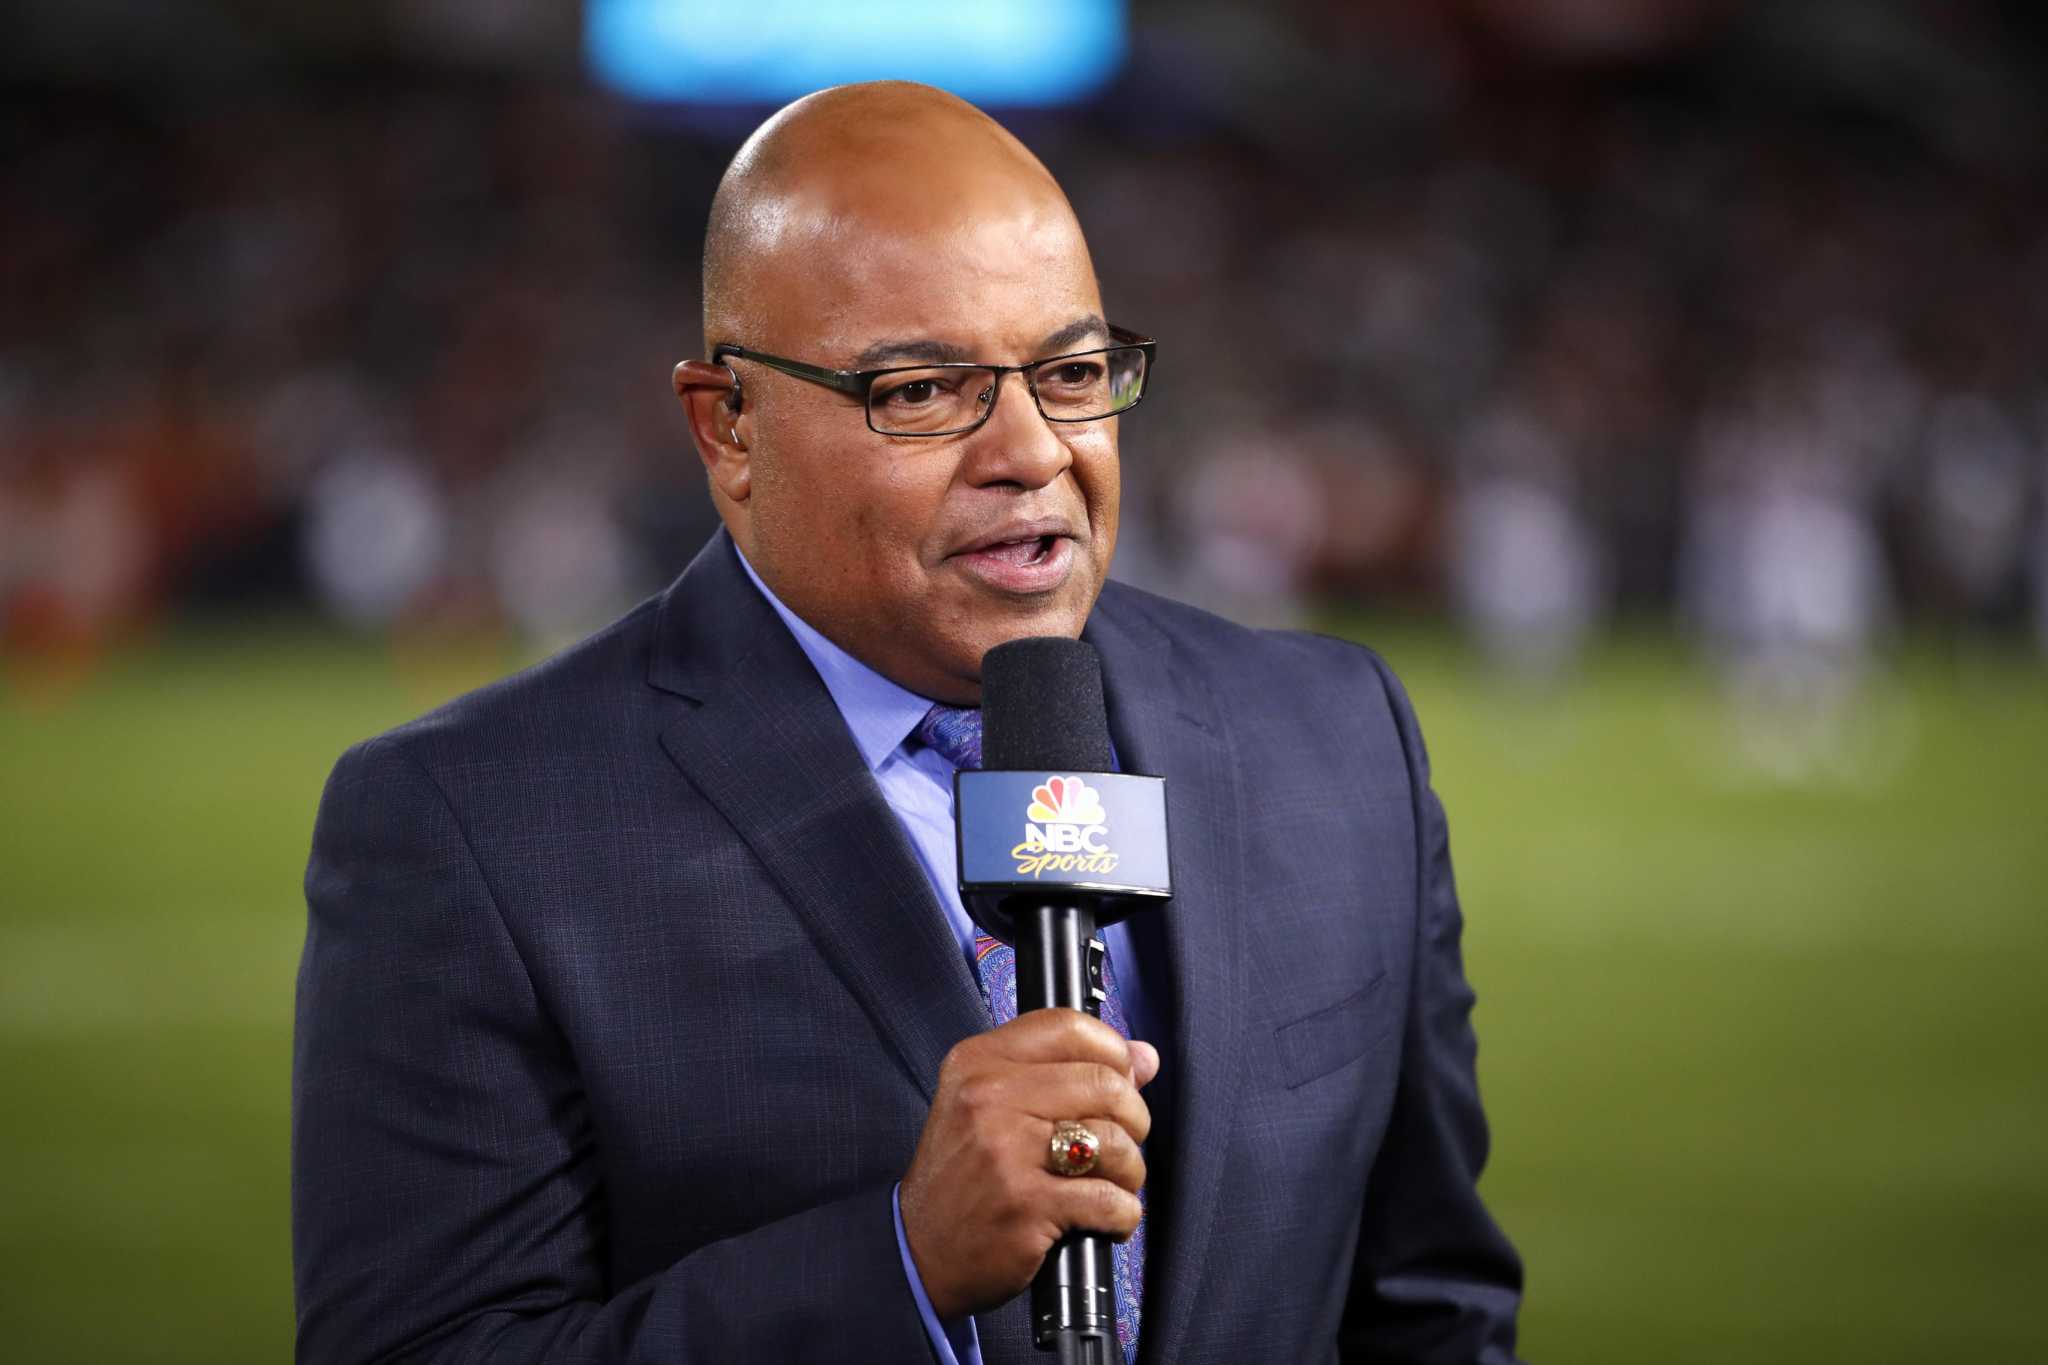 Mike Tirico to replace Al Michaels on NBC Sunday Night Football